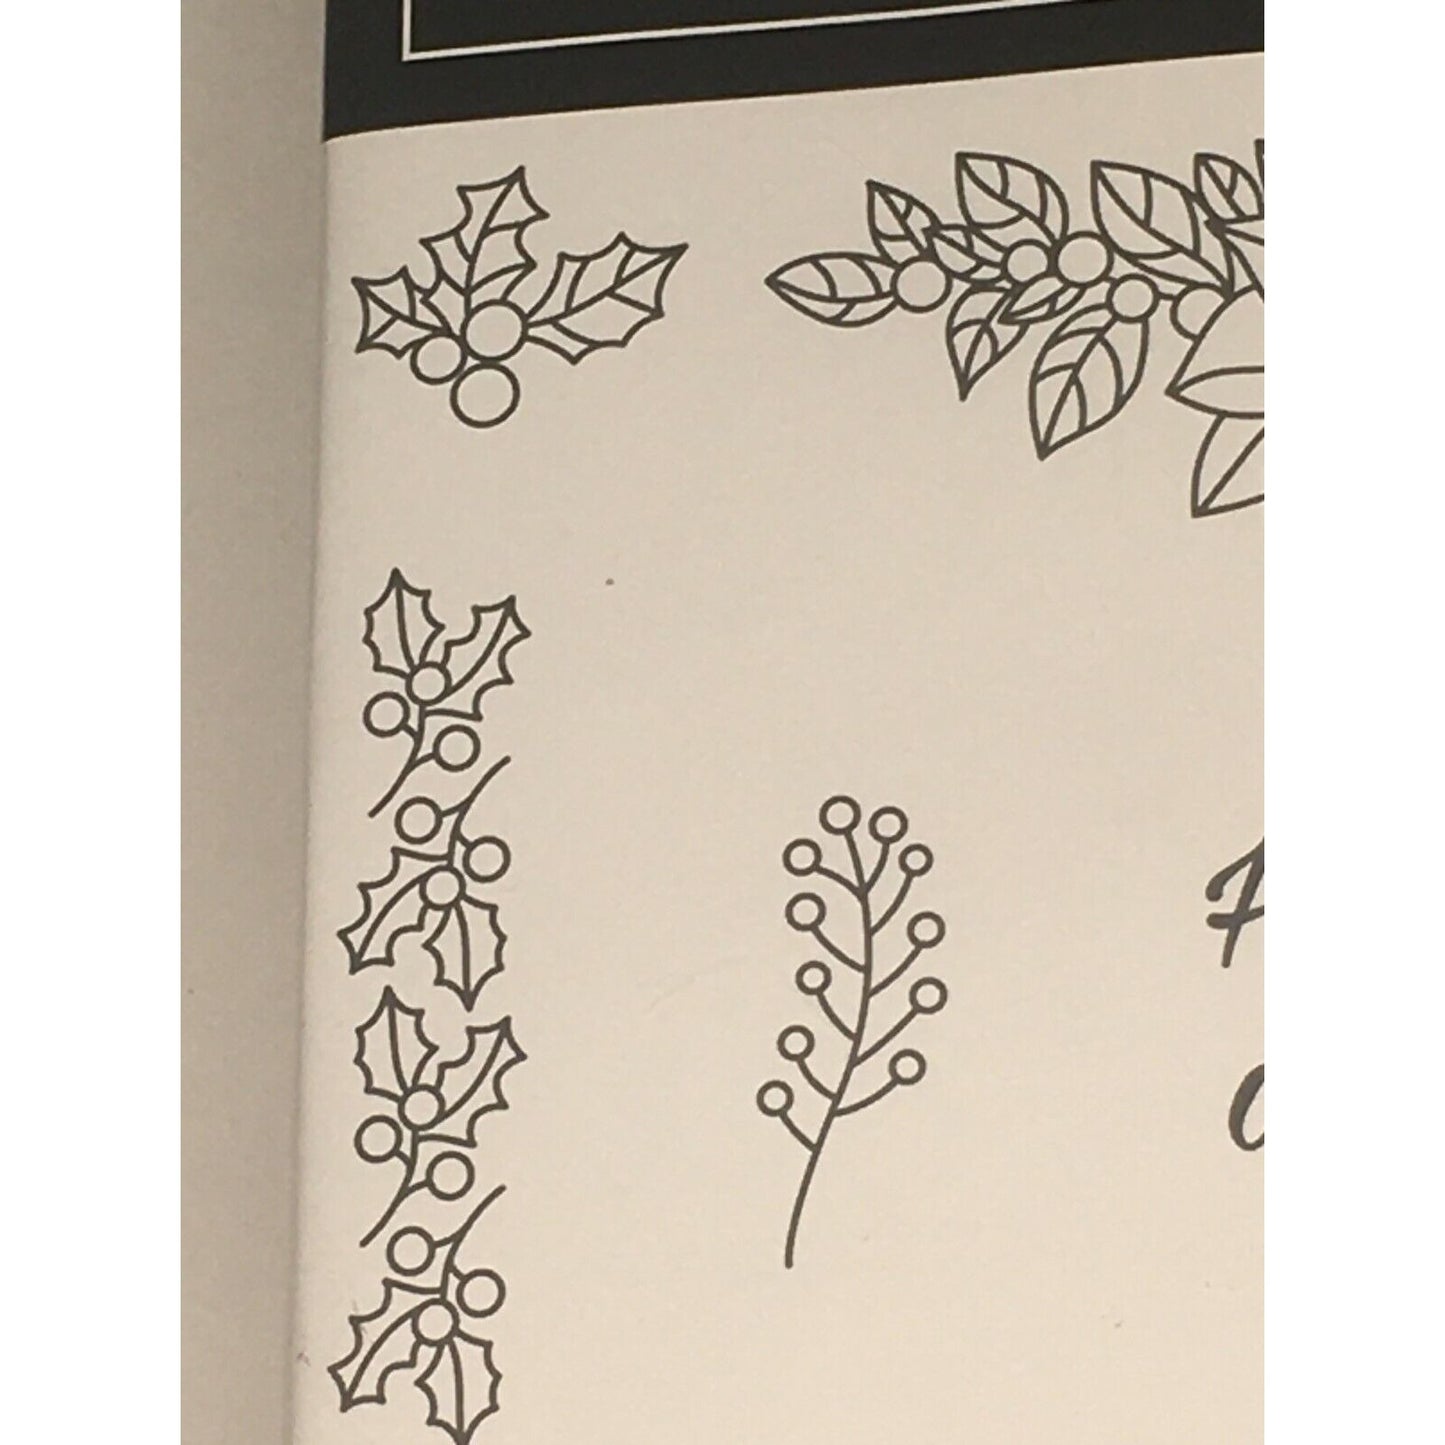 Stampin Up Peaceful Poinsettia Rubber Stamp Set Christmas Holly Berries Peace